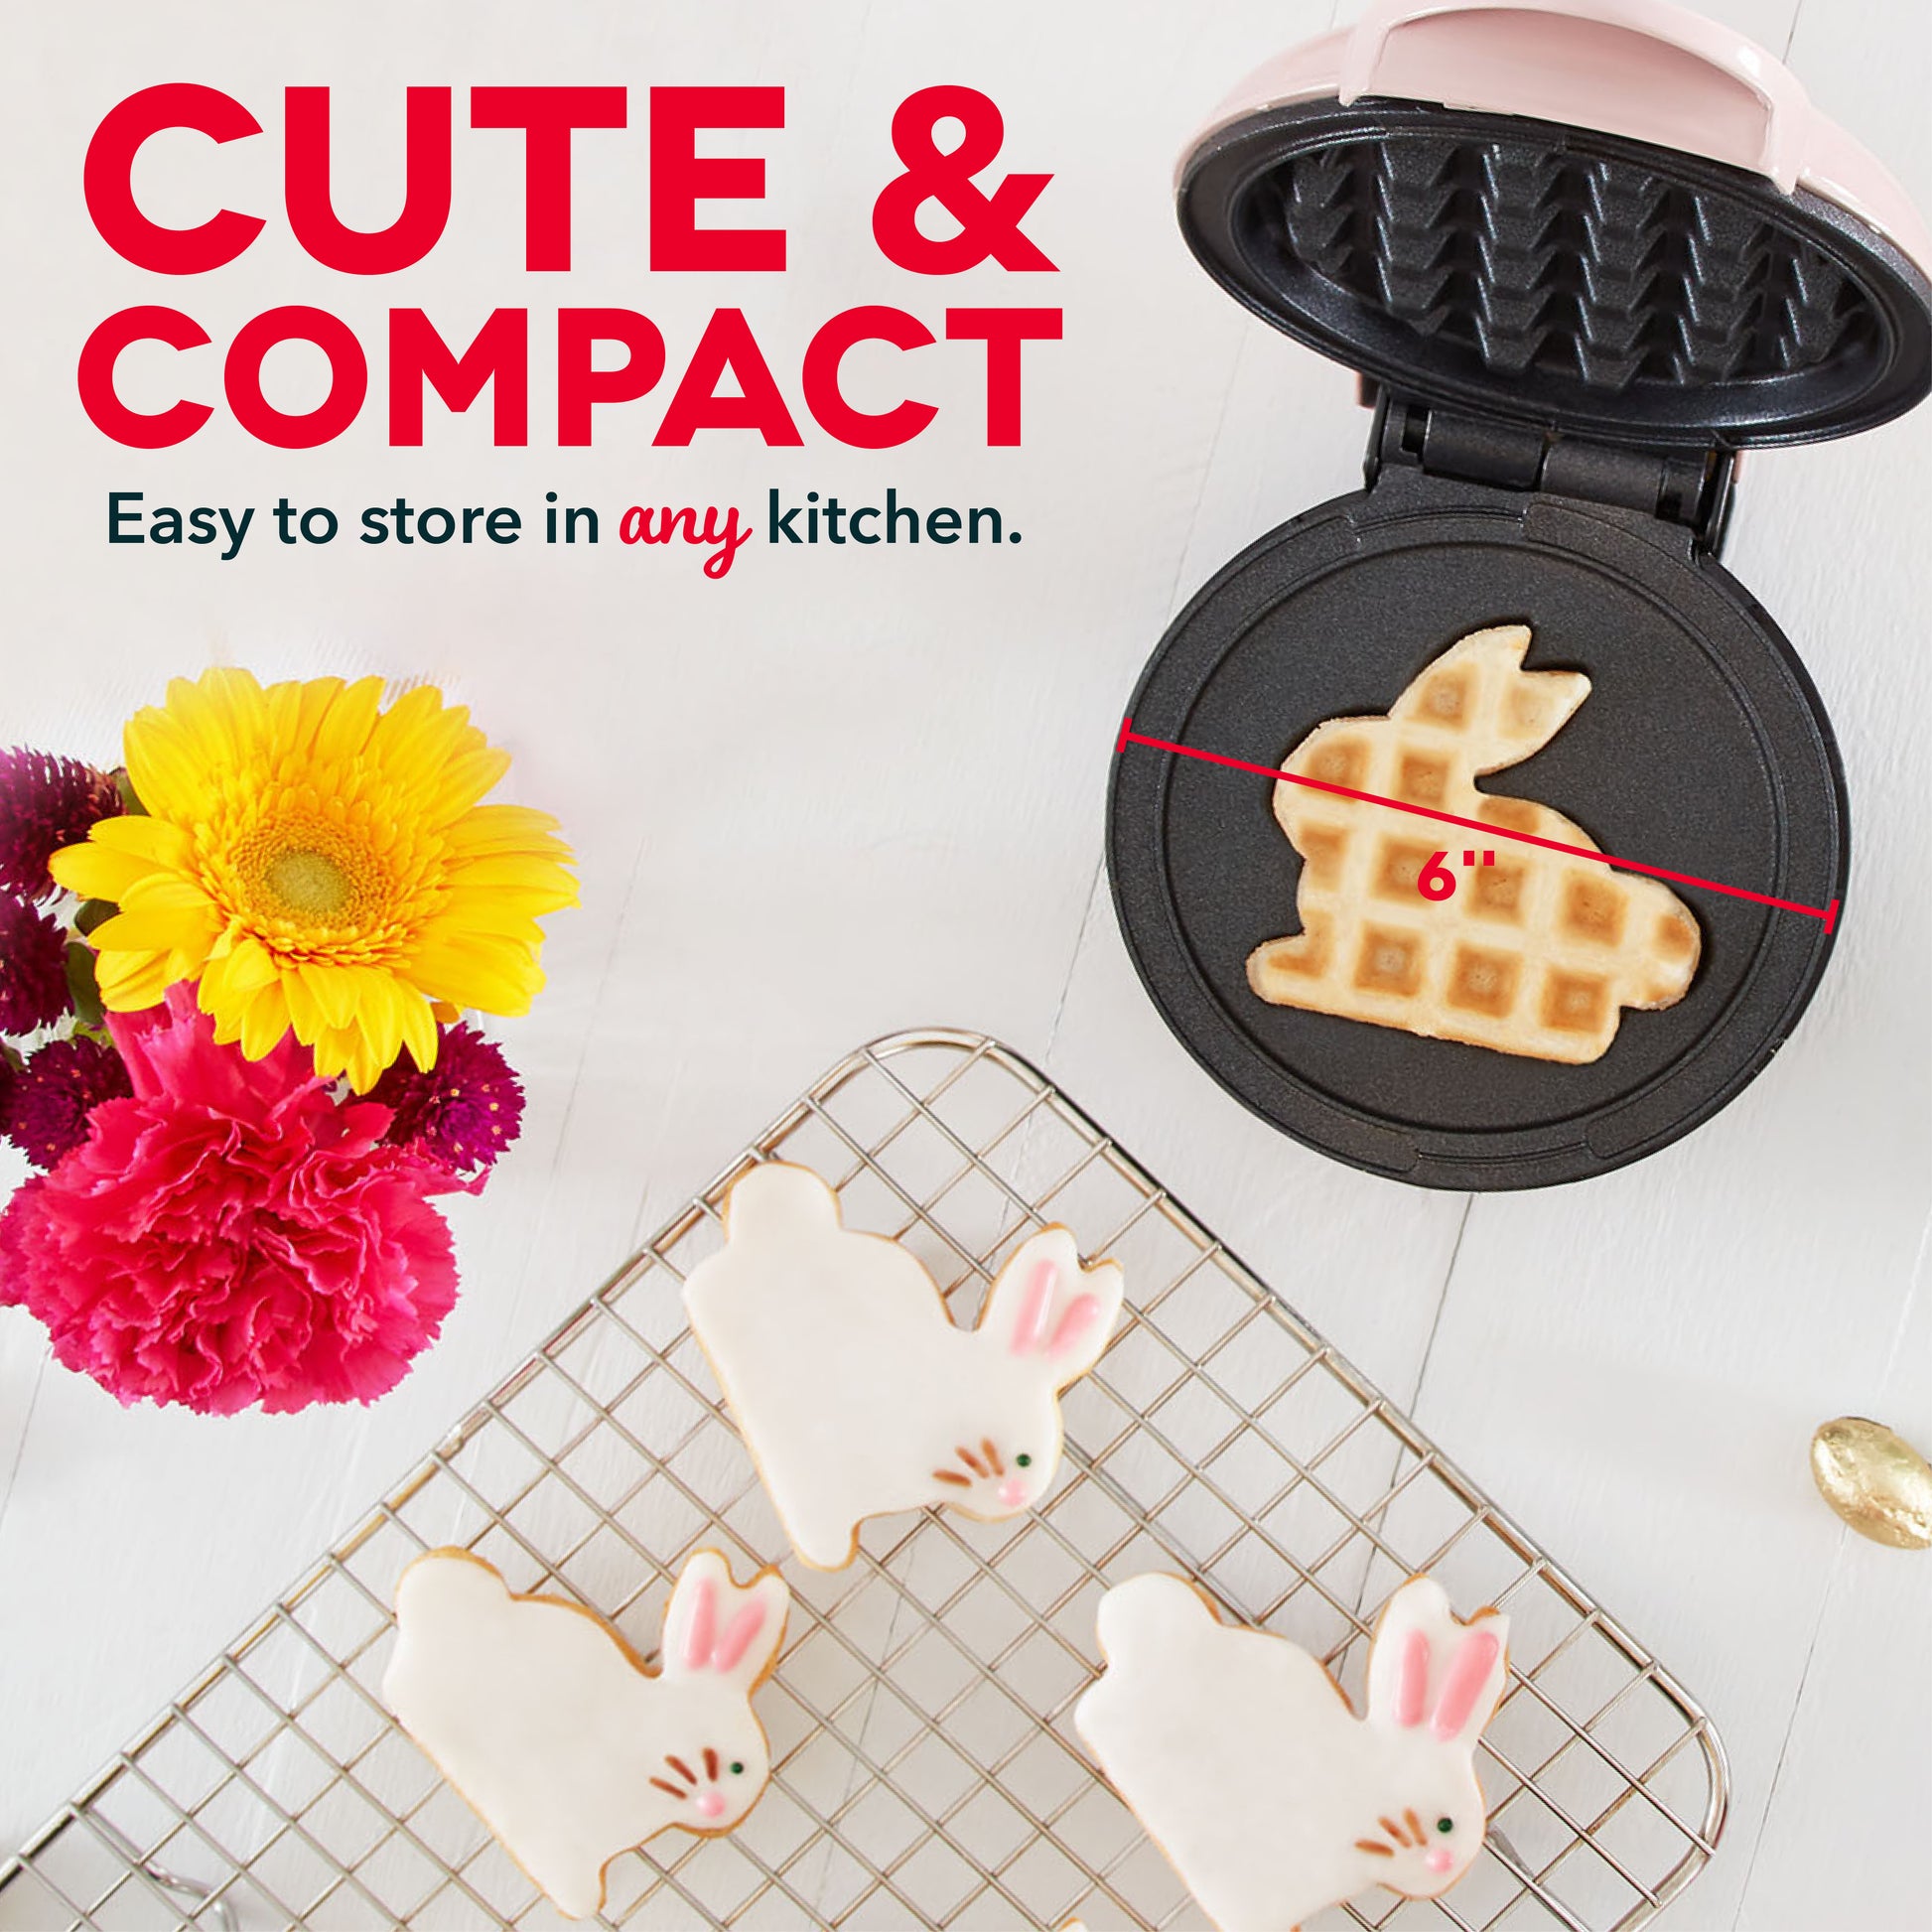 Dash Mini Makers review: Tools for an adorable brunch - Reviewed